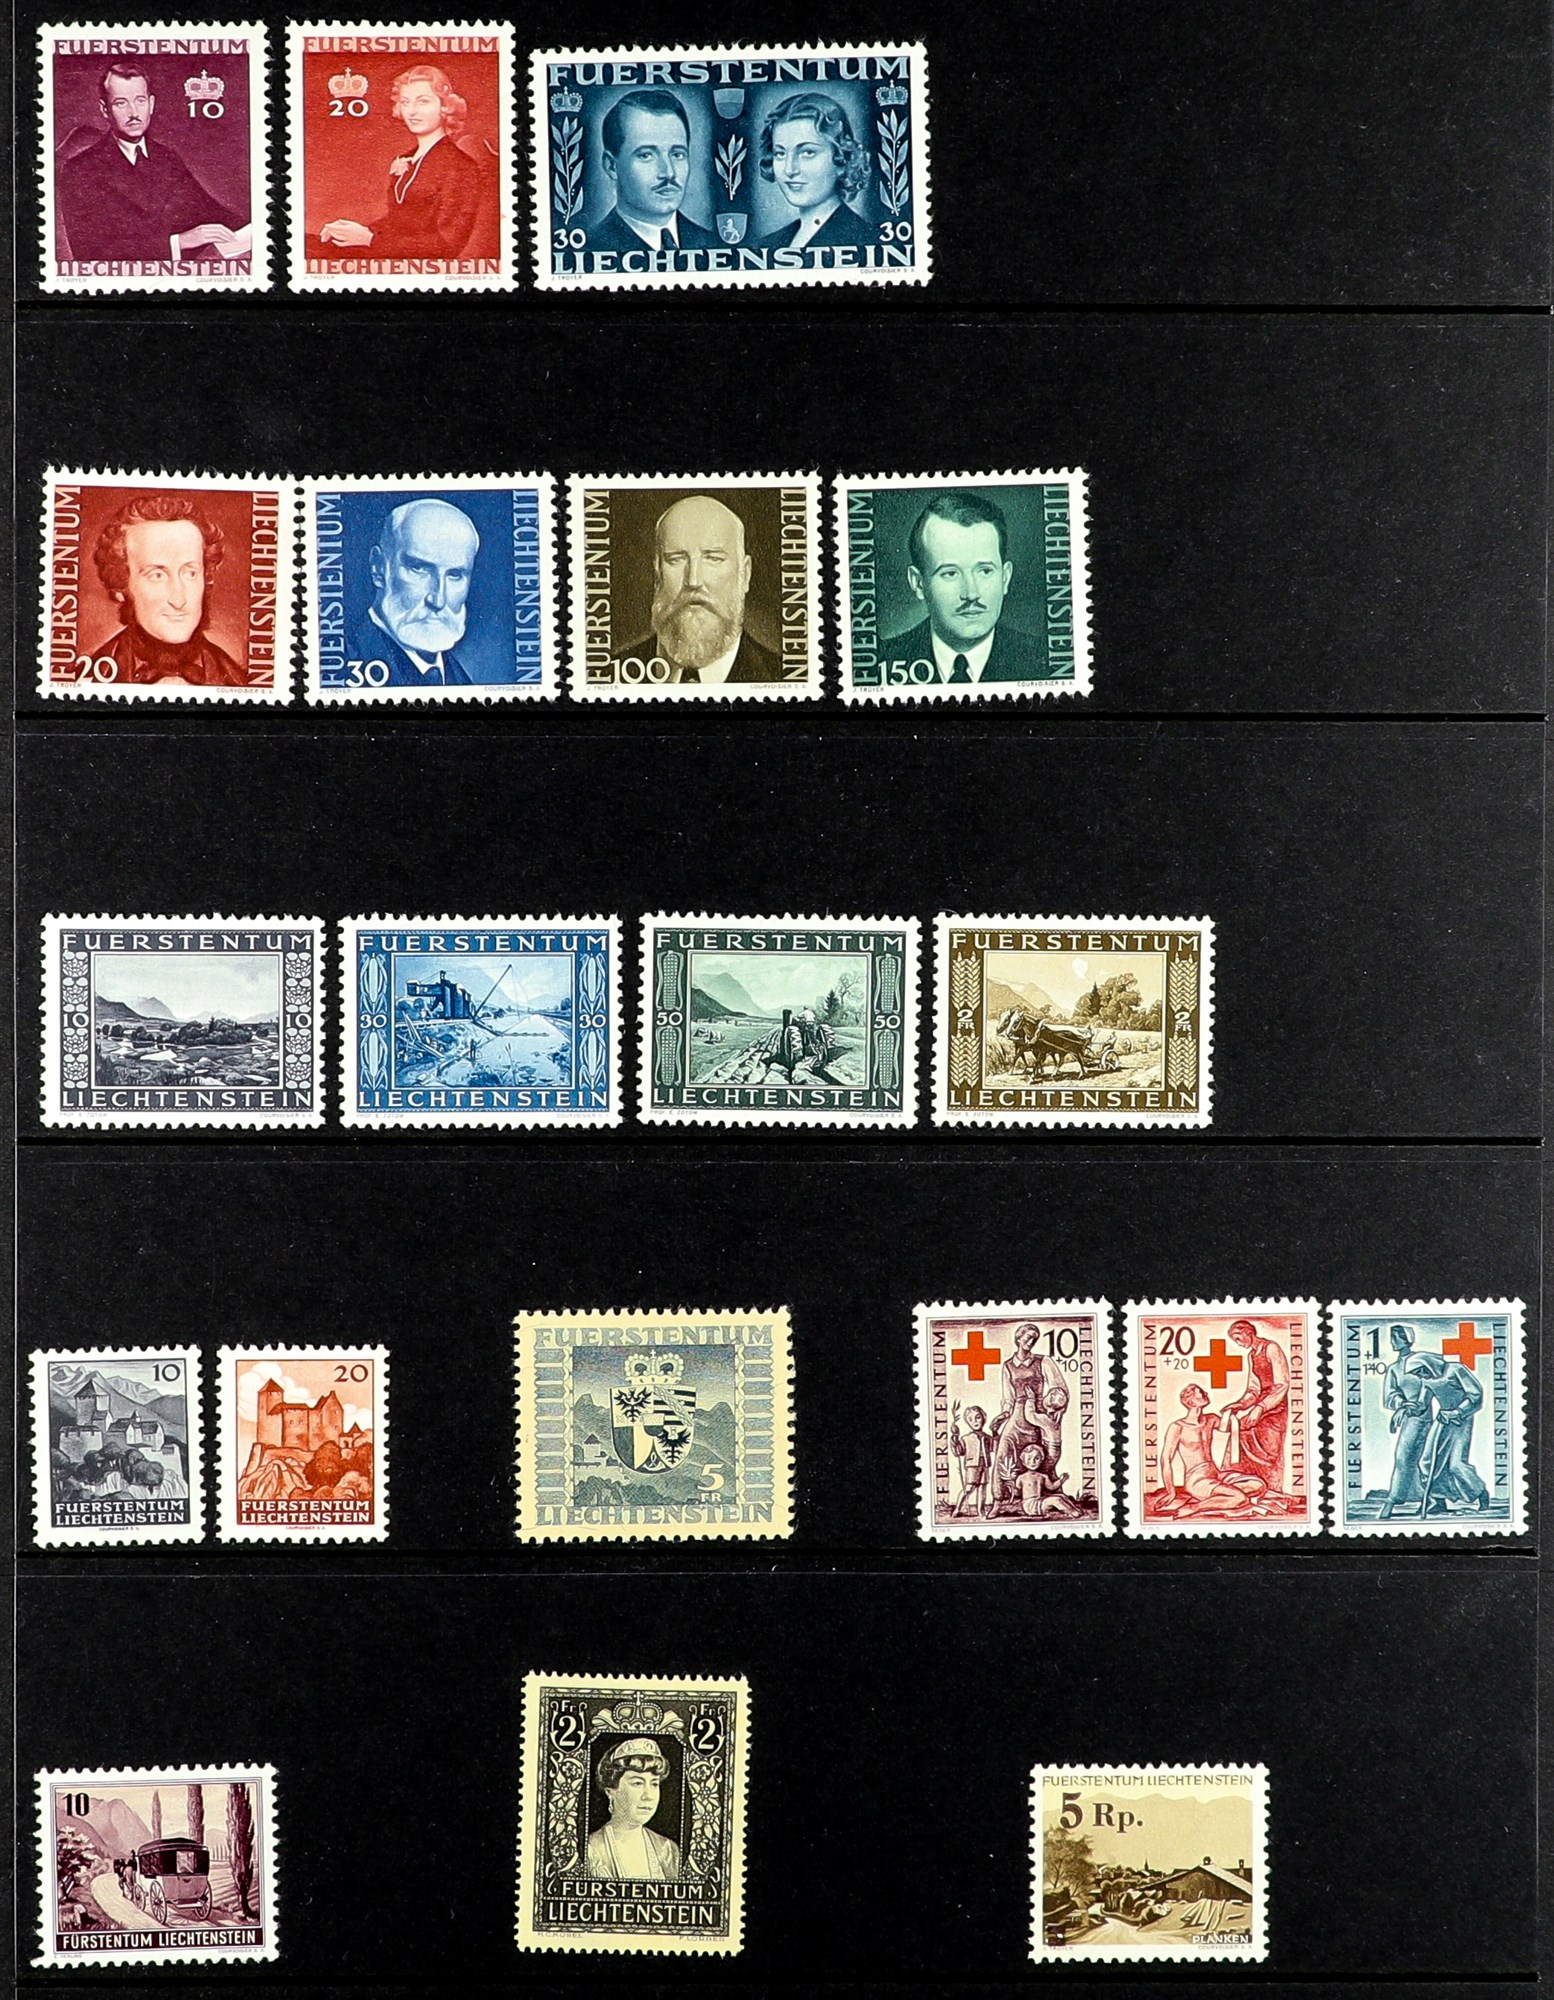 LIECHTENSTEIN 1938 - 1993 COLLECTION of 650+ never hinged mint stamps & 15 miniature sheets on - Image 3 of 11